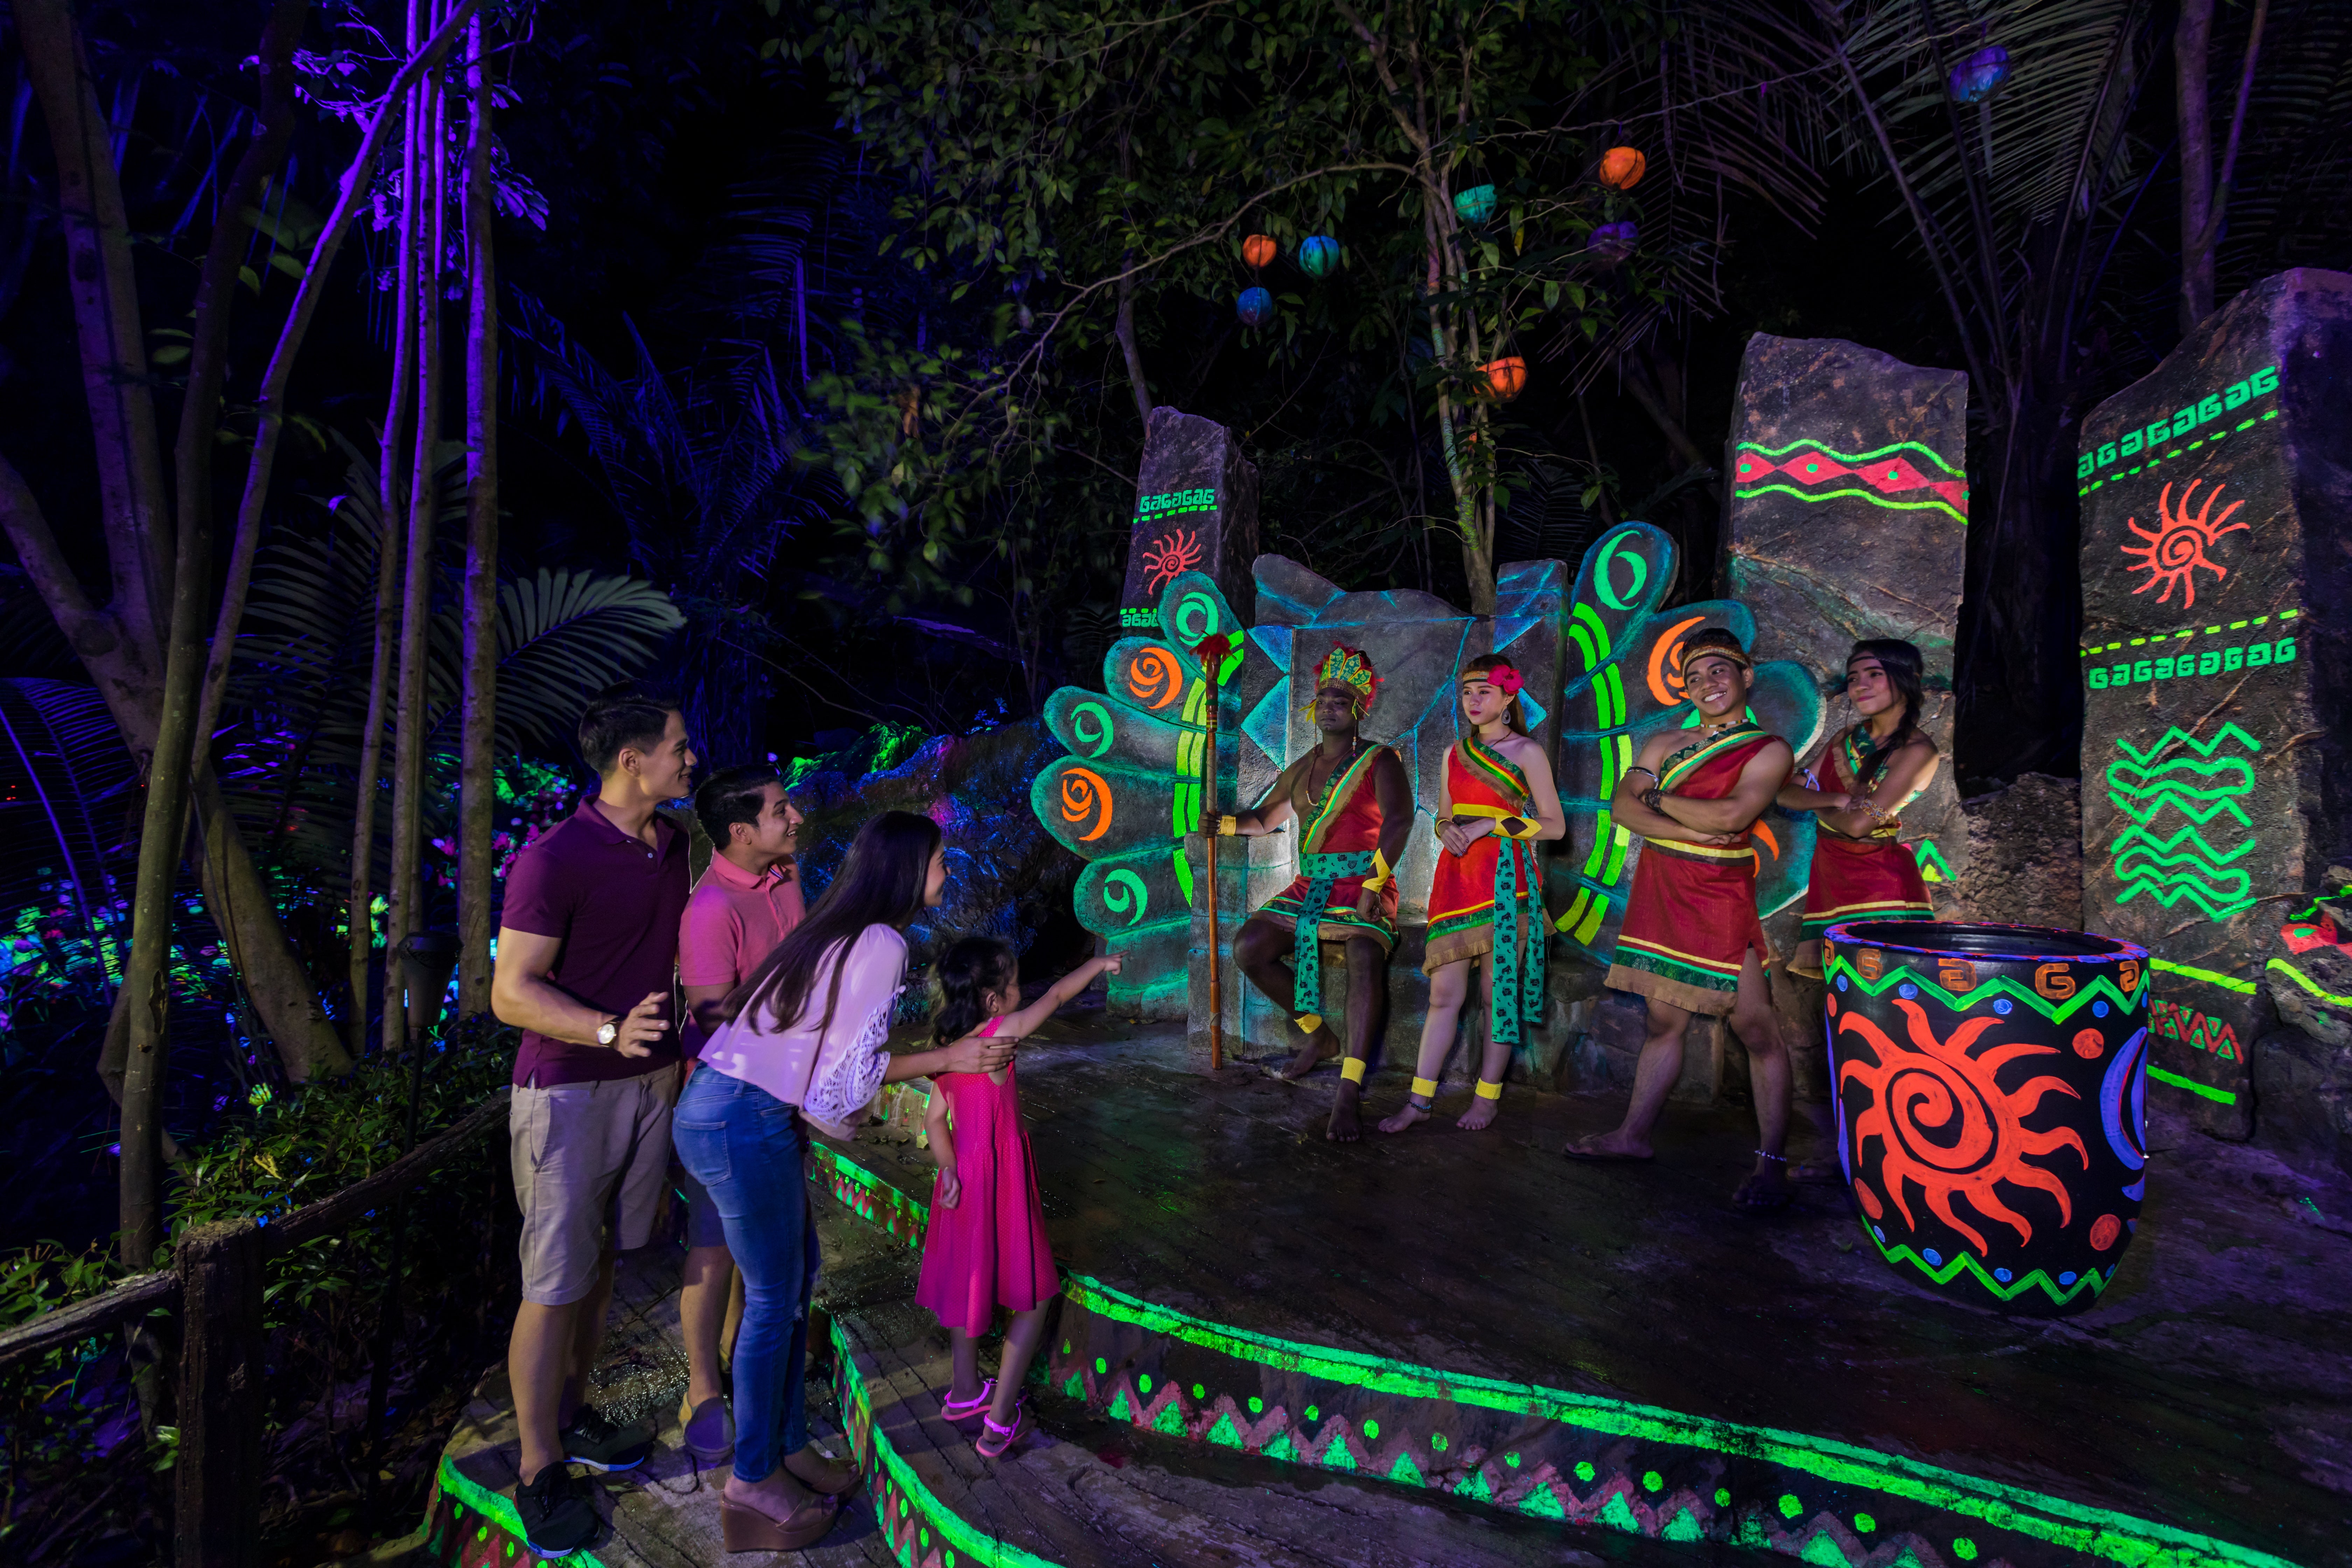 [Test] No Plans This Year-End? Here's 8 Reasons to Check Out Sunway Lost World of Tambun! - WORLD OF BUZZ 3